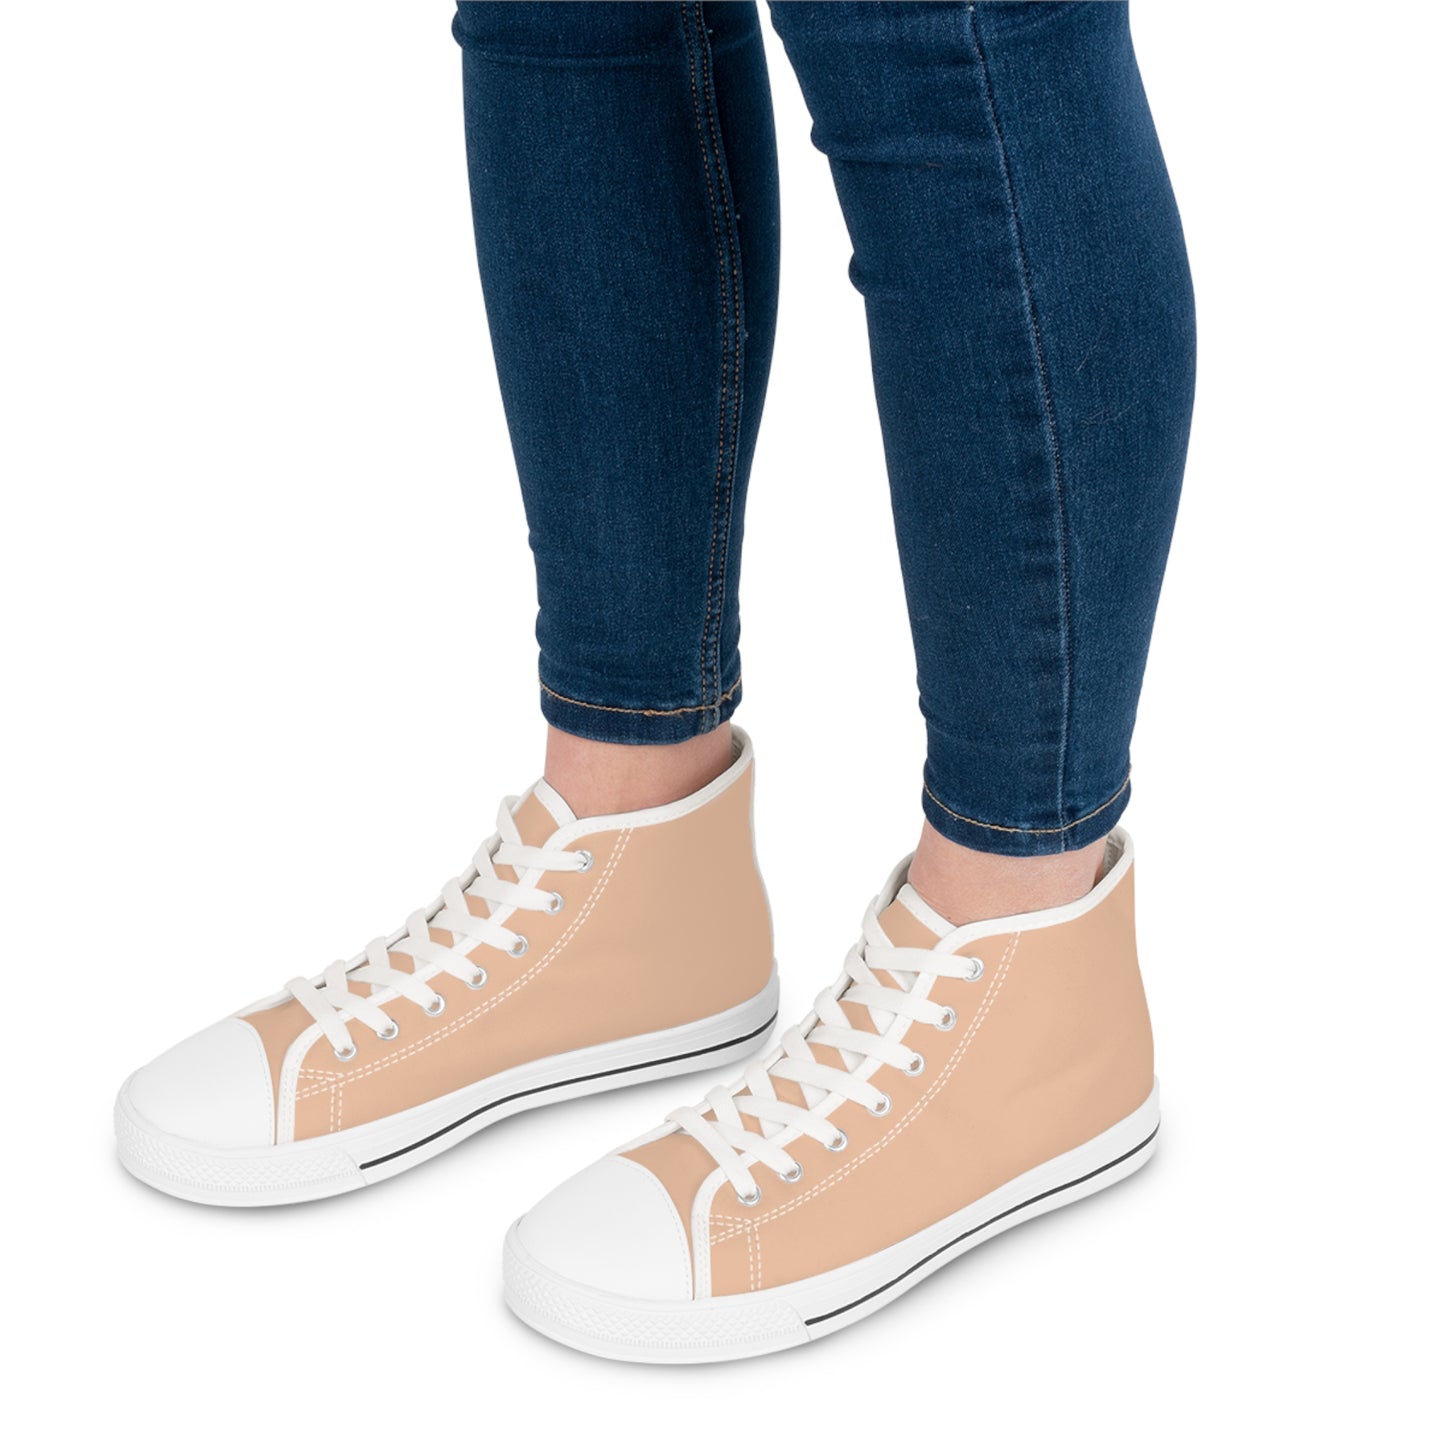 Women's Canvas High Top Solid Color Sneakers - Orange Cream US 12 White sole